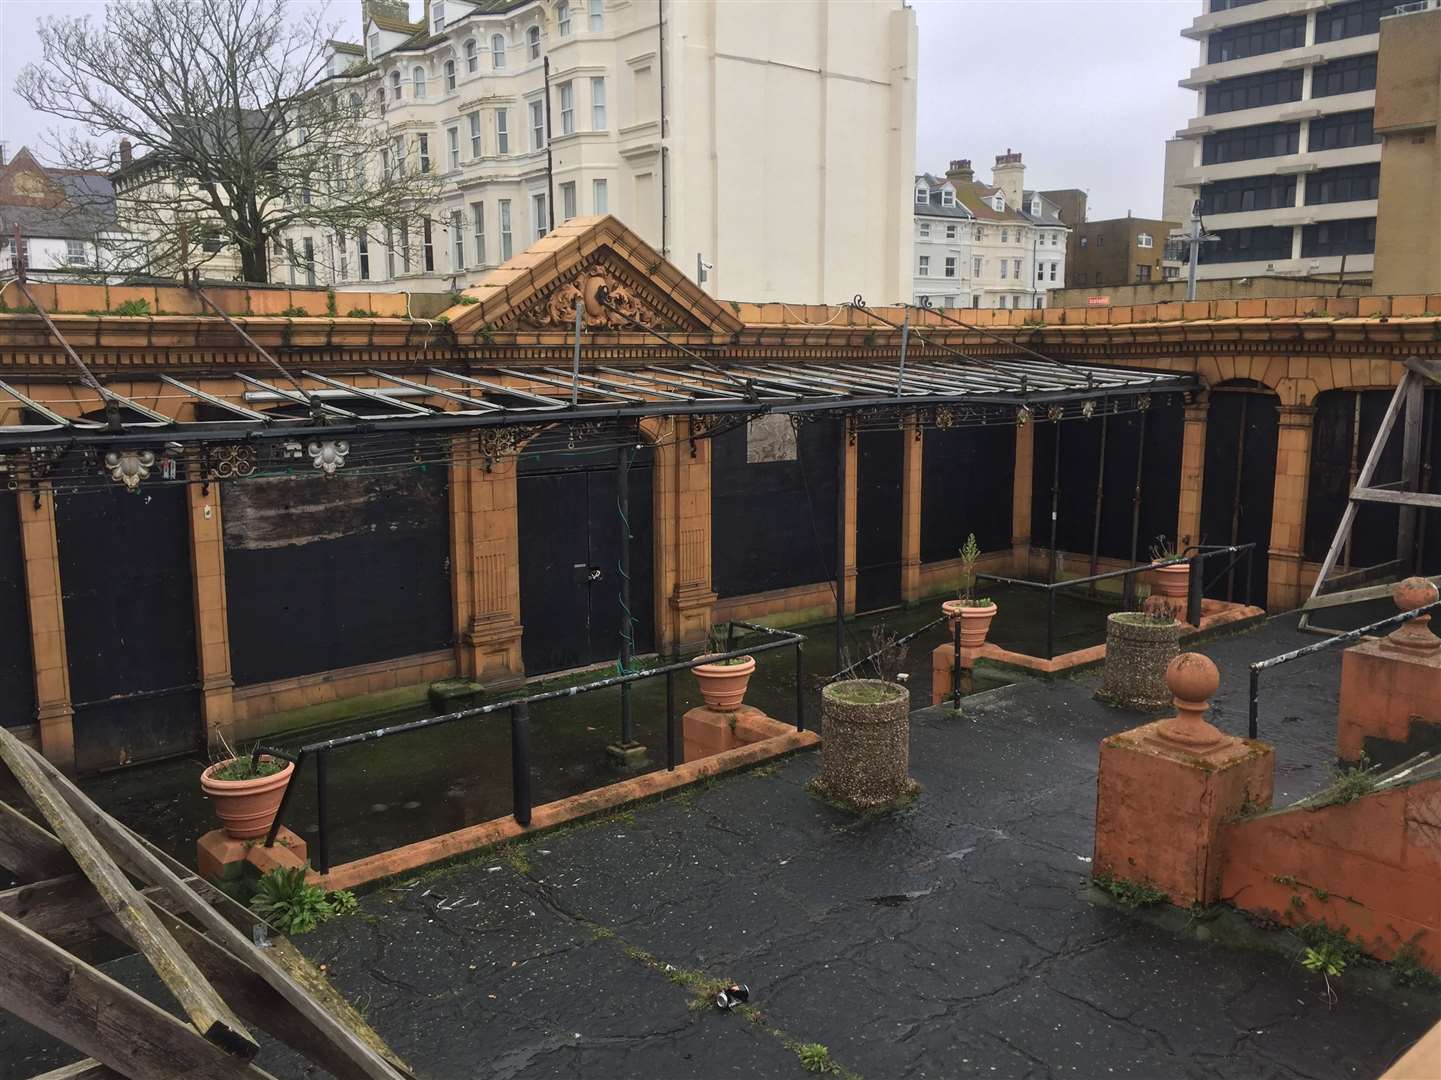 Former theatre and tearoom Leas Pavilion is over 100 years old